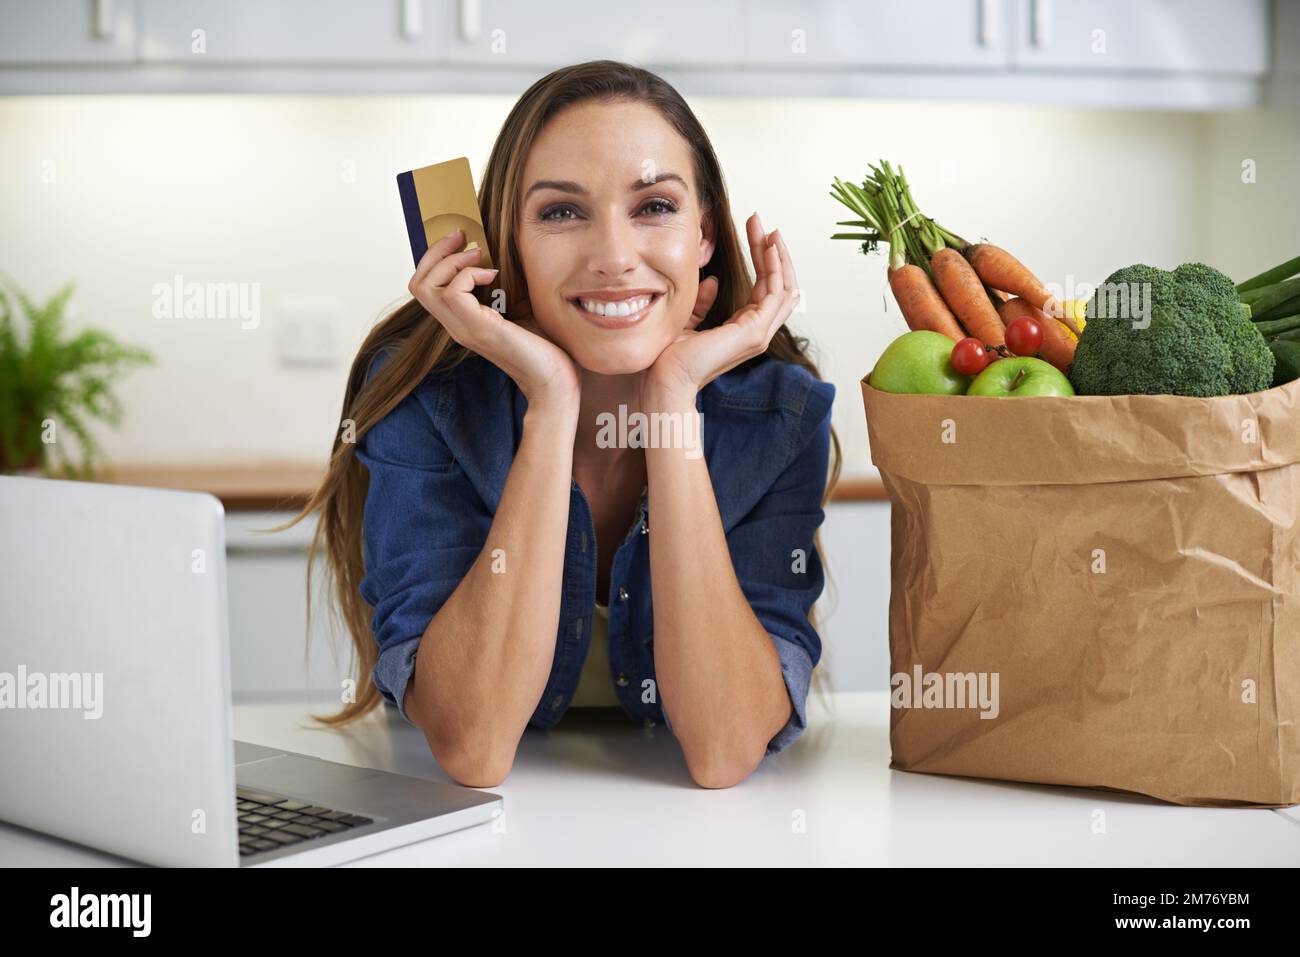 Now that Ive got the groceries...online shopping. a young woman doing some online shopping with her groceries beside her. Stock Photo